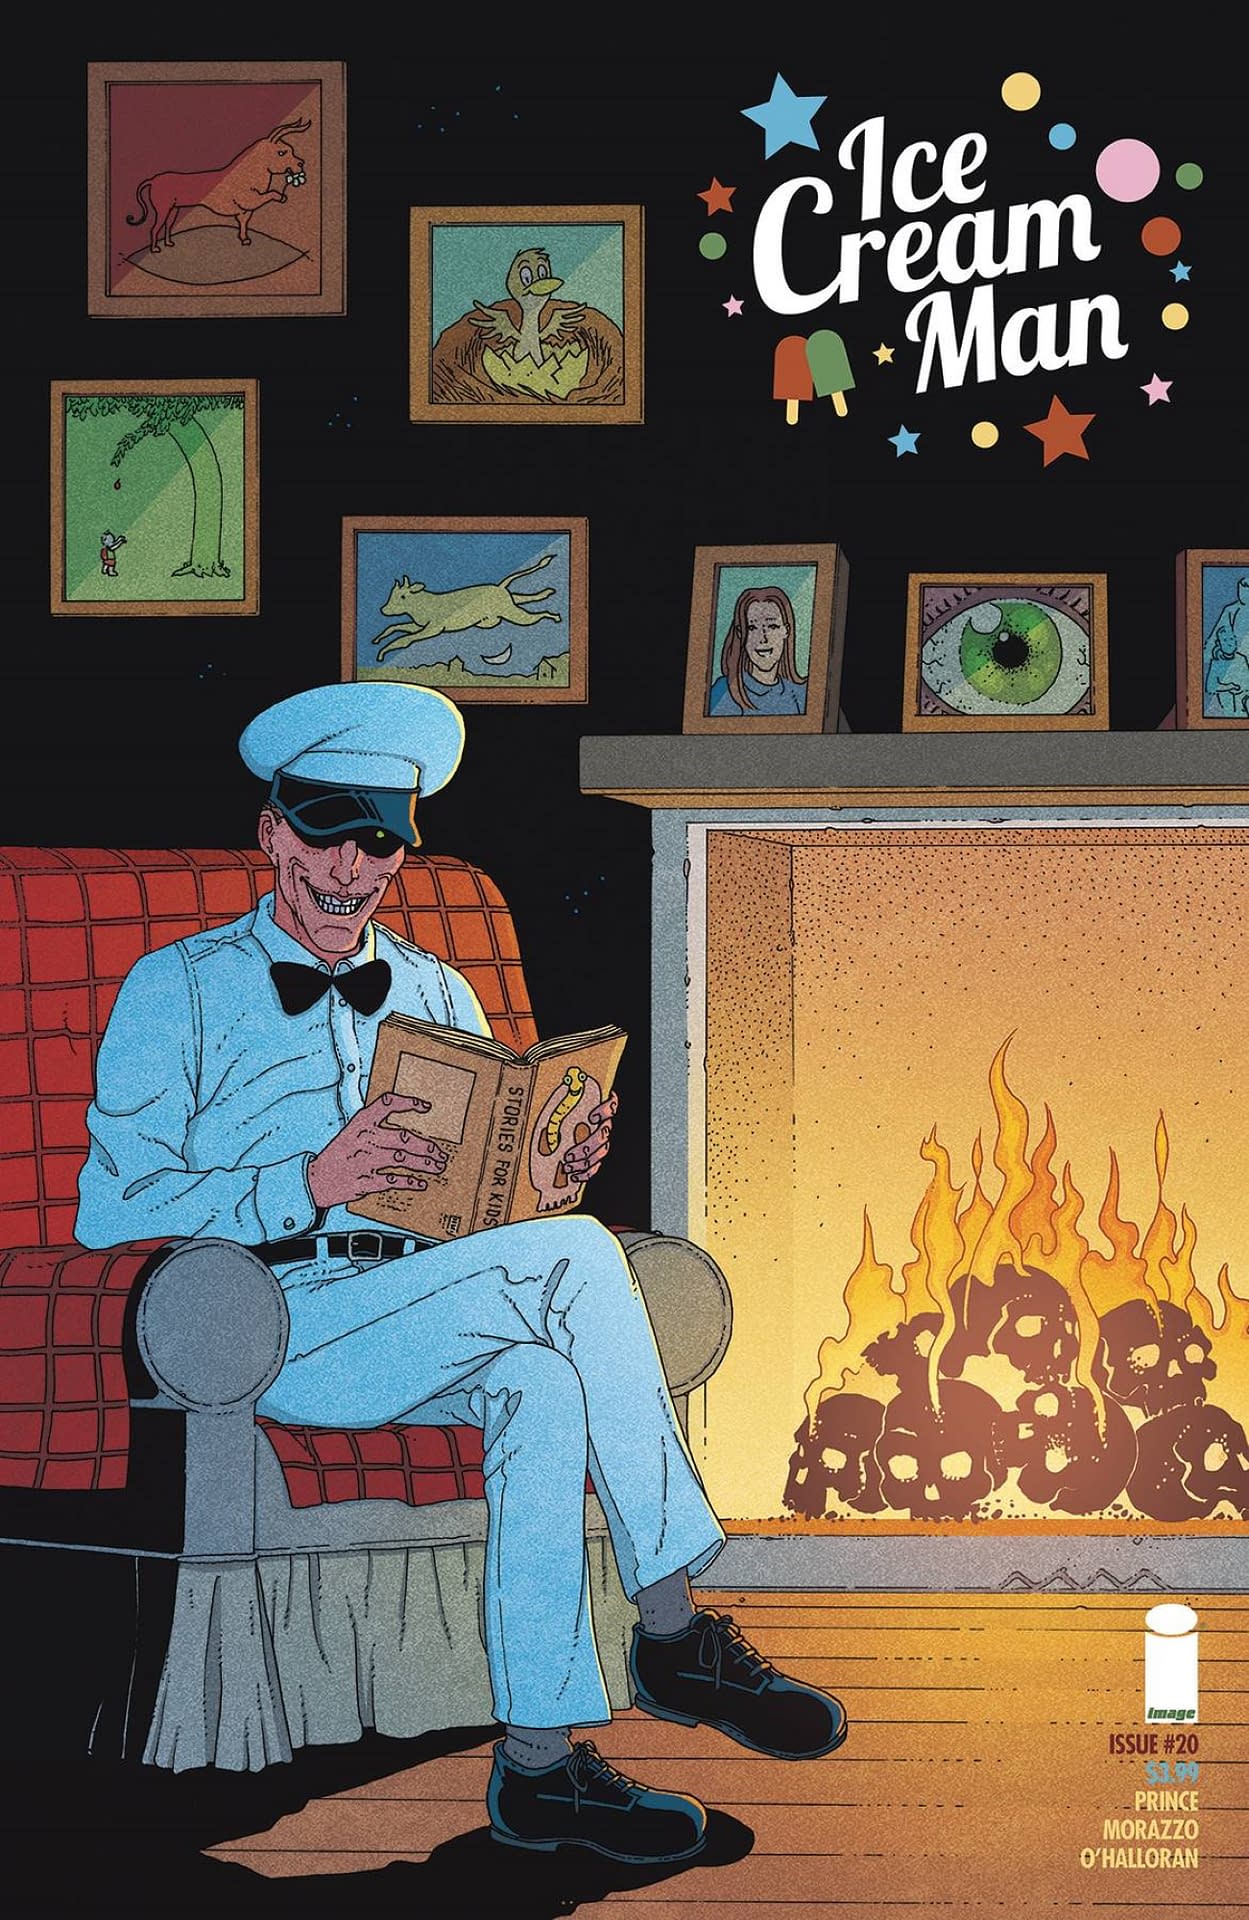 Ice Cream Man Second Printing From Image Sells More Than First